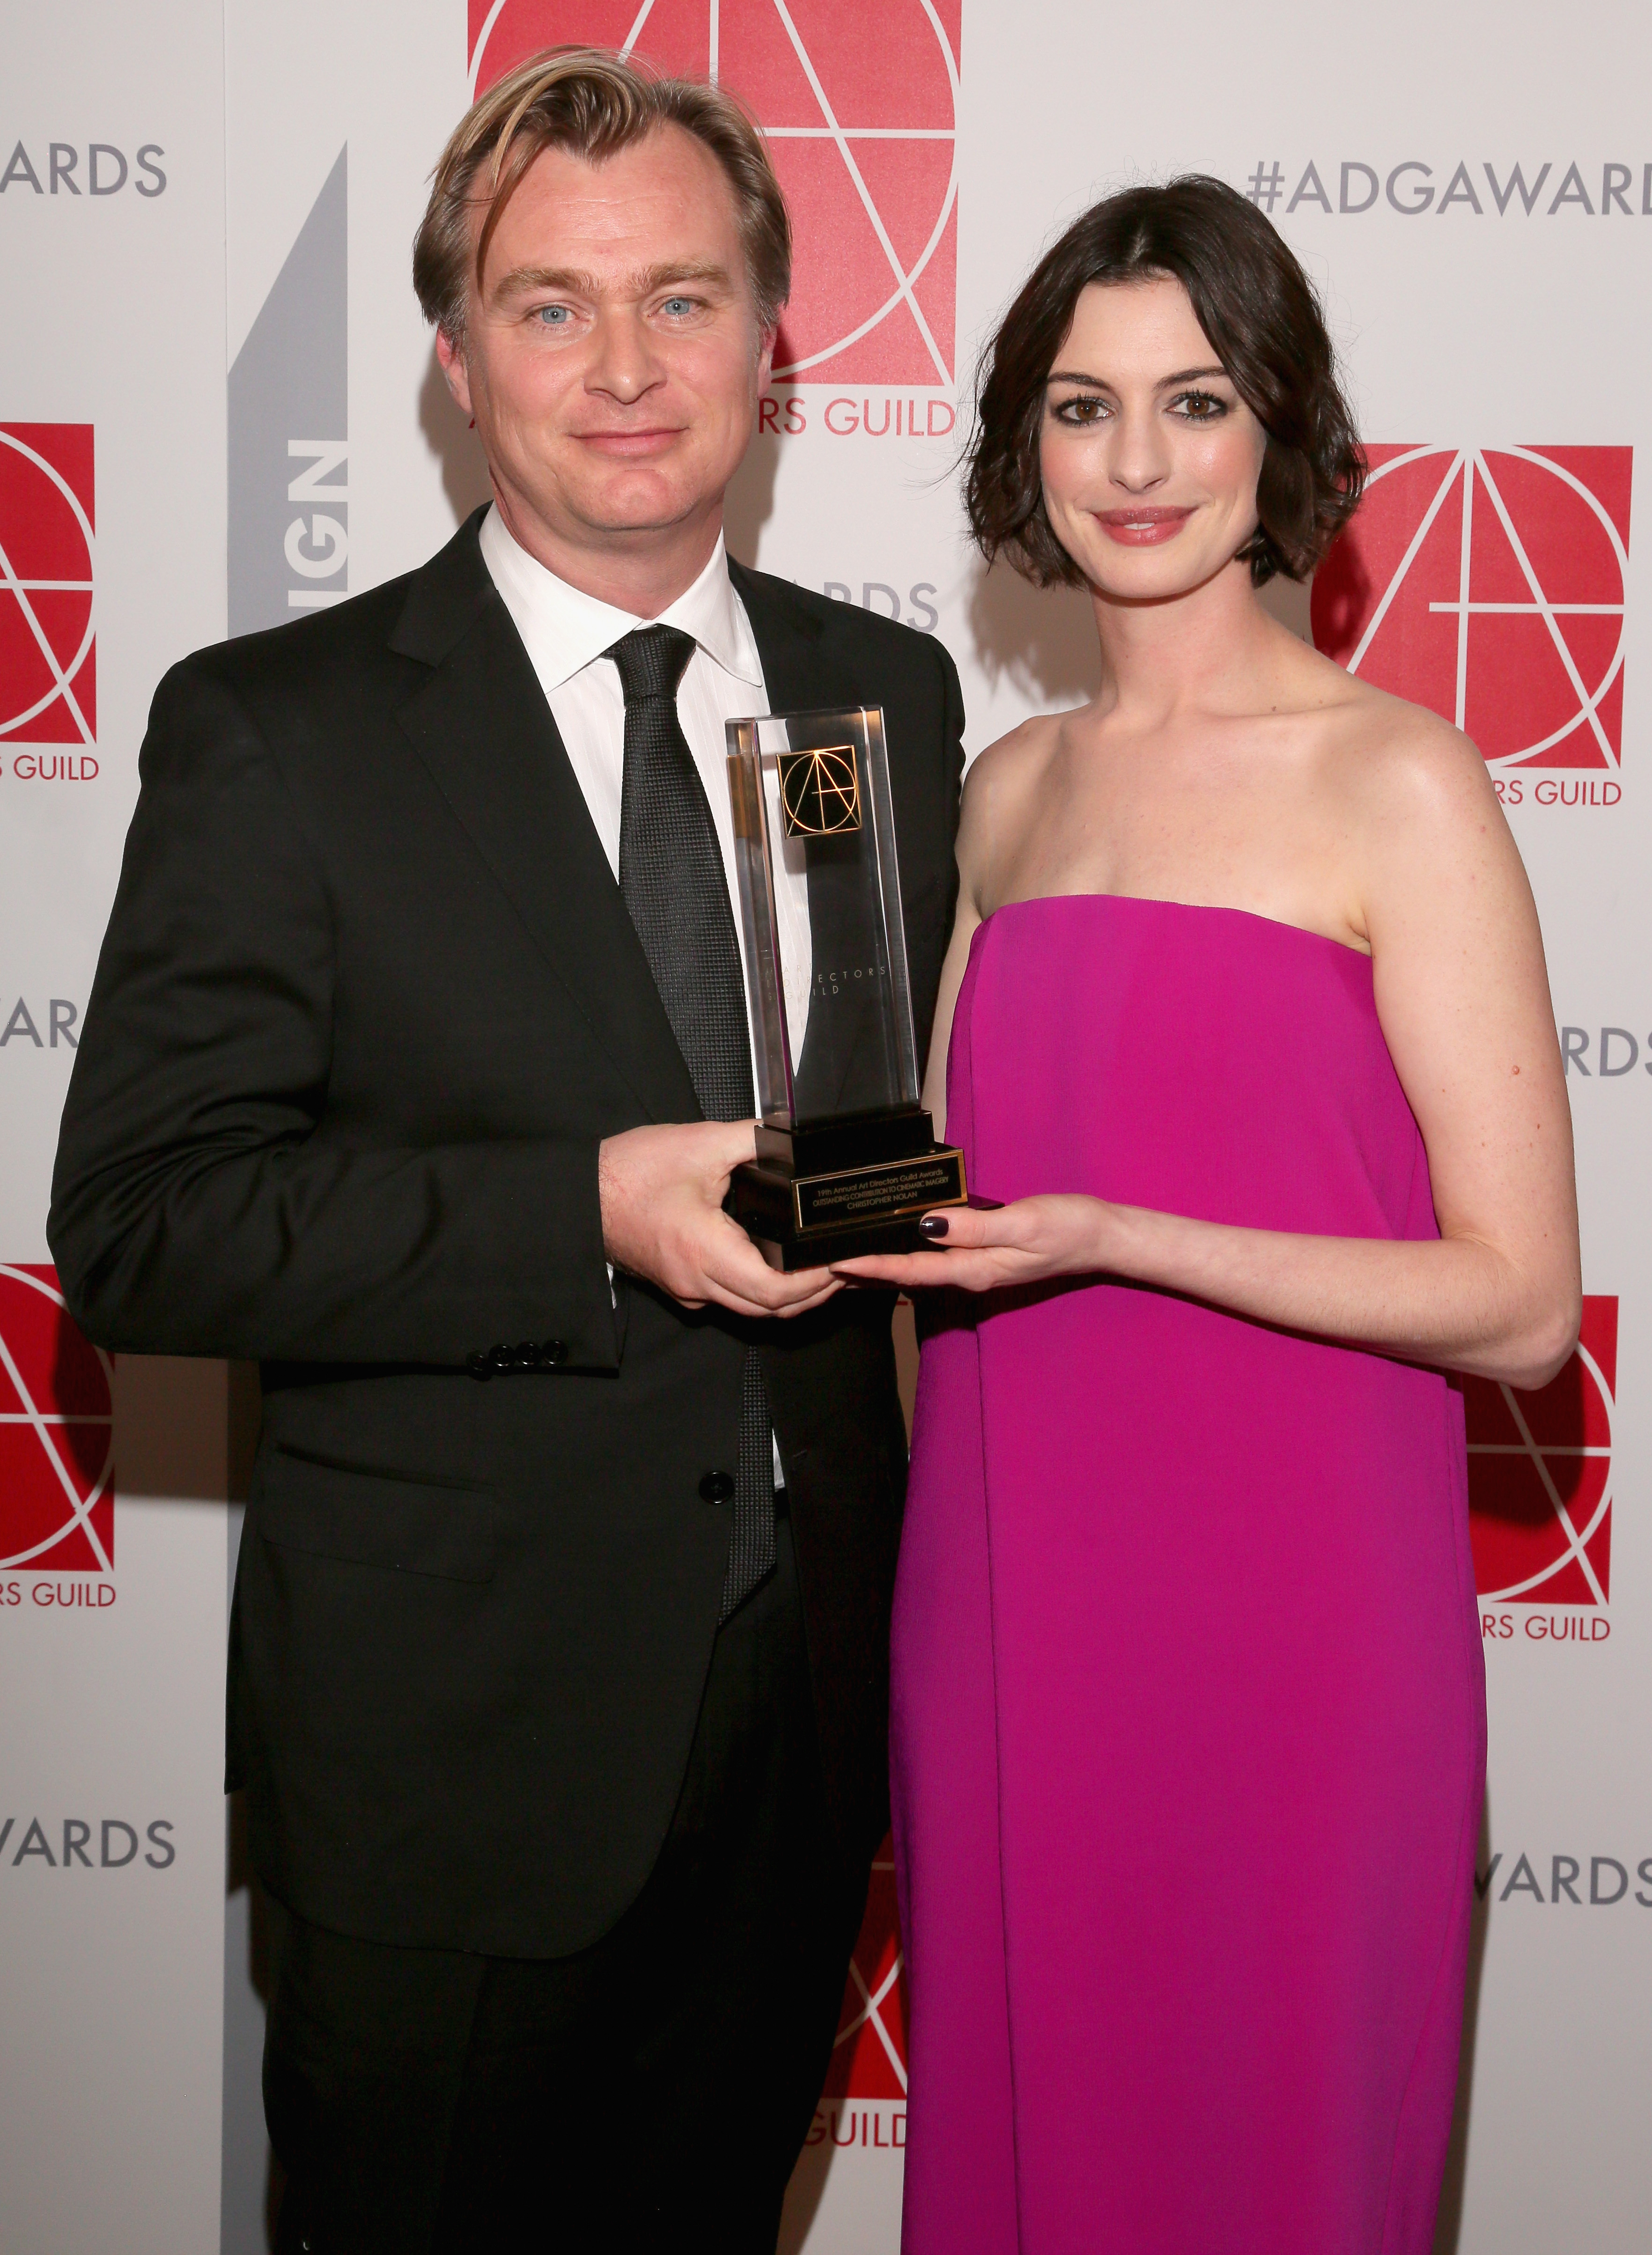 Christopher Nolan and Anne Hathaway together at an event and holding an award